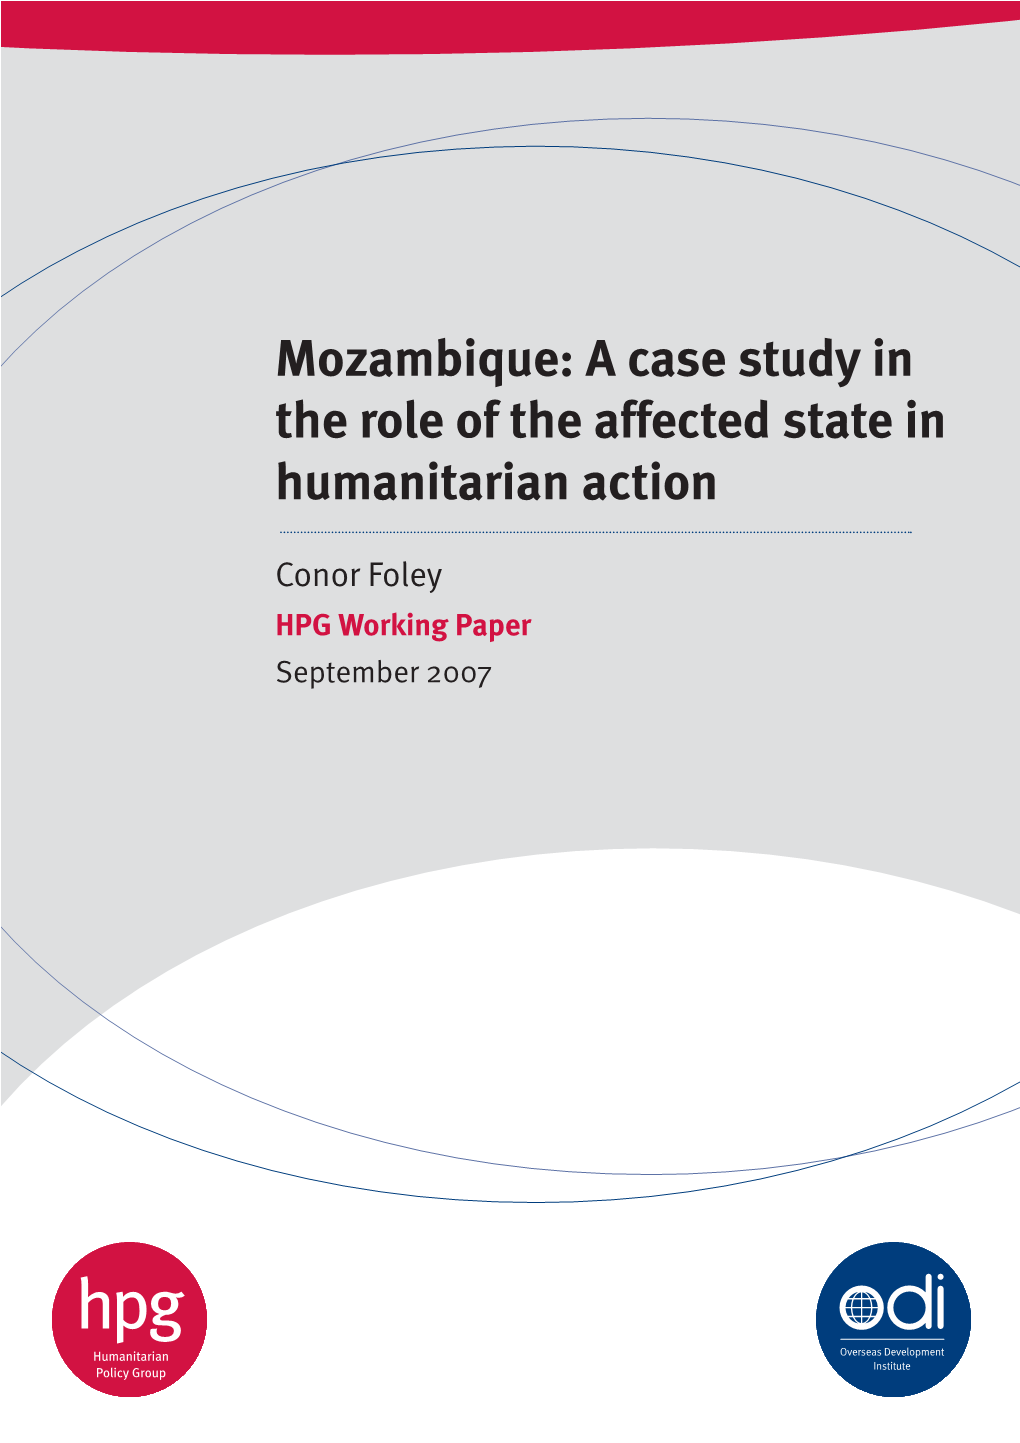 Mozambique: a Case Study in the Role of the Affected State in Humanitarian Action